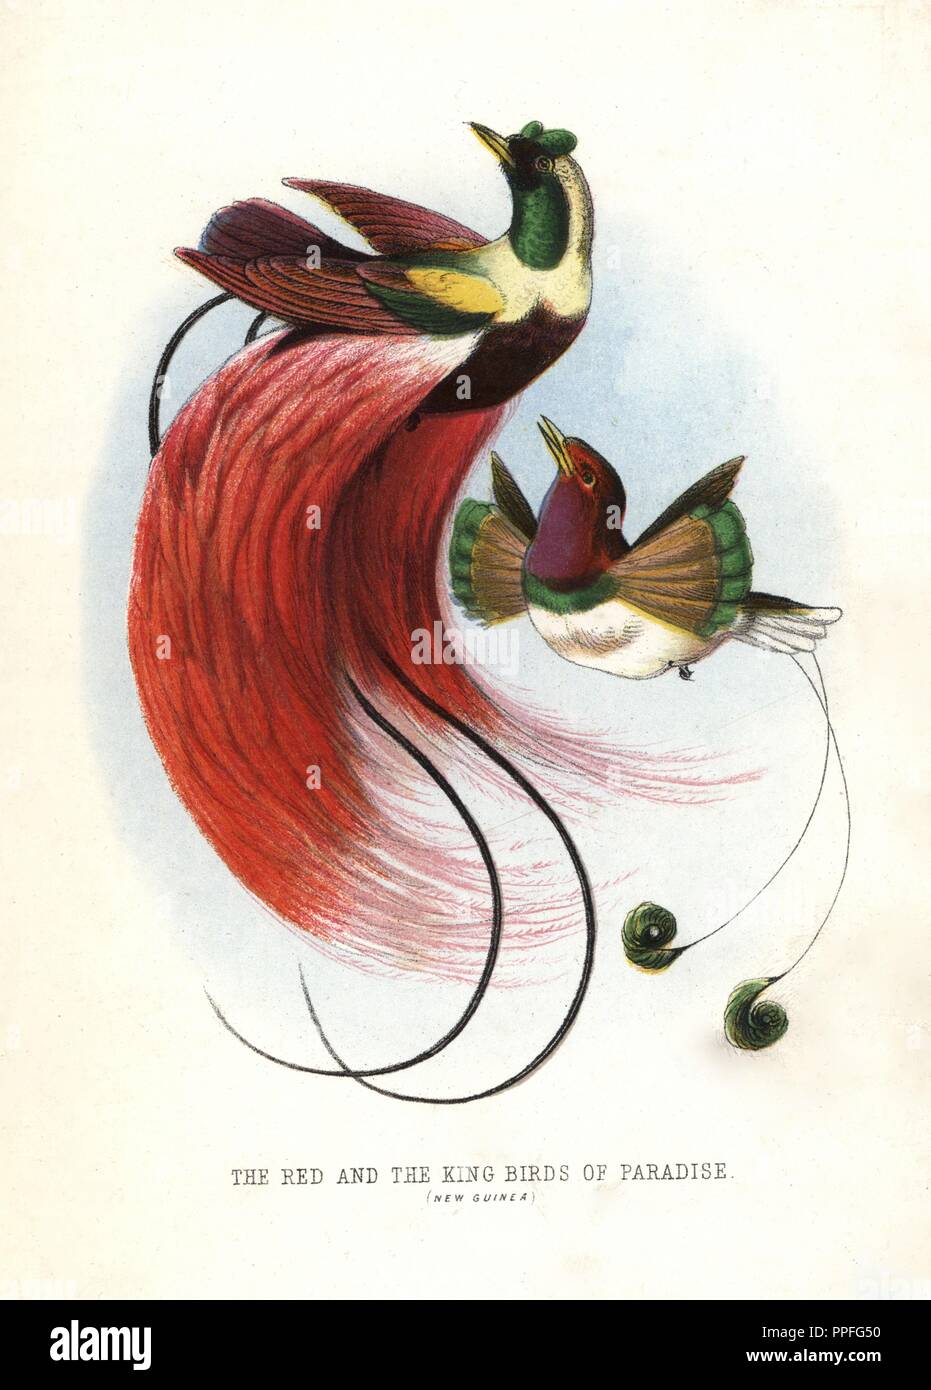 Red bird-of-paradise, Paradisaea rubra (near threatened), and king bird-of-paradise, Cicinnurus regius. Chromolithograph by unknown artist/engraver from Mary and Elizabeth Kirby's 'Beautiful Birds in Far-Off Lands,' T. Nelson, London, 1872. Mary Kirby (1817-1893) and Elizabeth Kirby (1823-1873) were two Victorian sisters who wrote many natural history books for children. Stock Photo